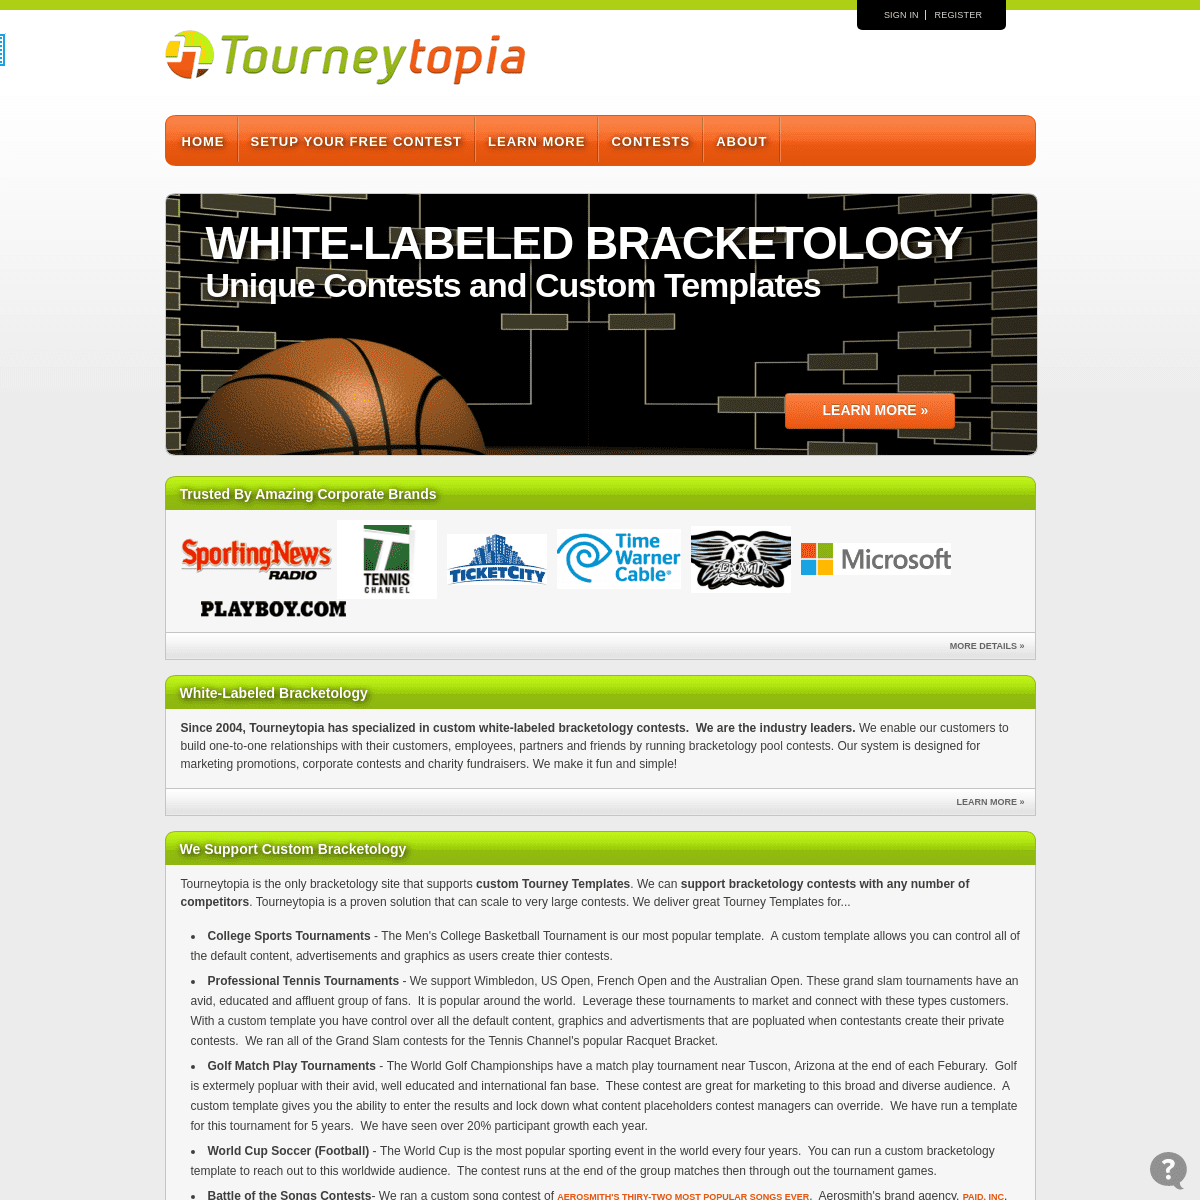 A complete backup of tourneytopia.com